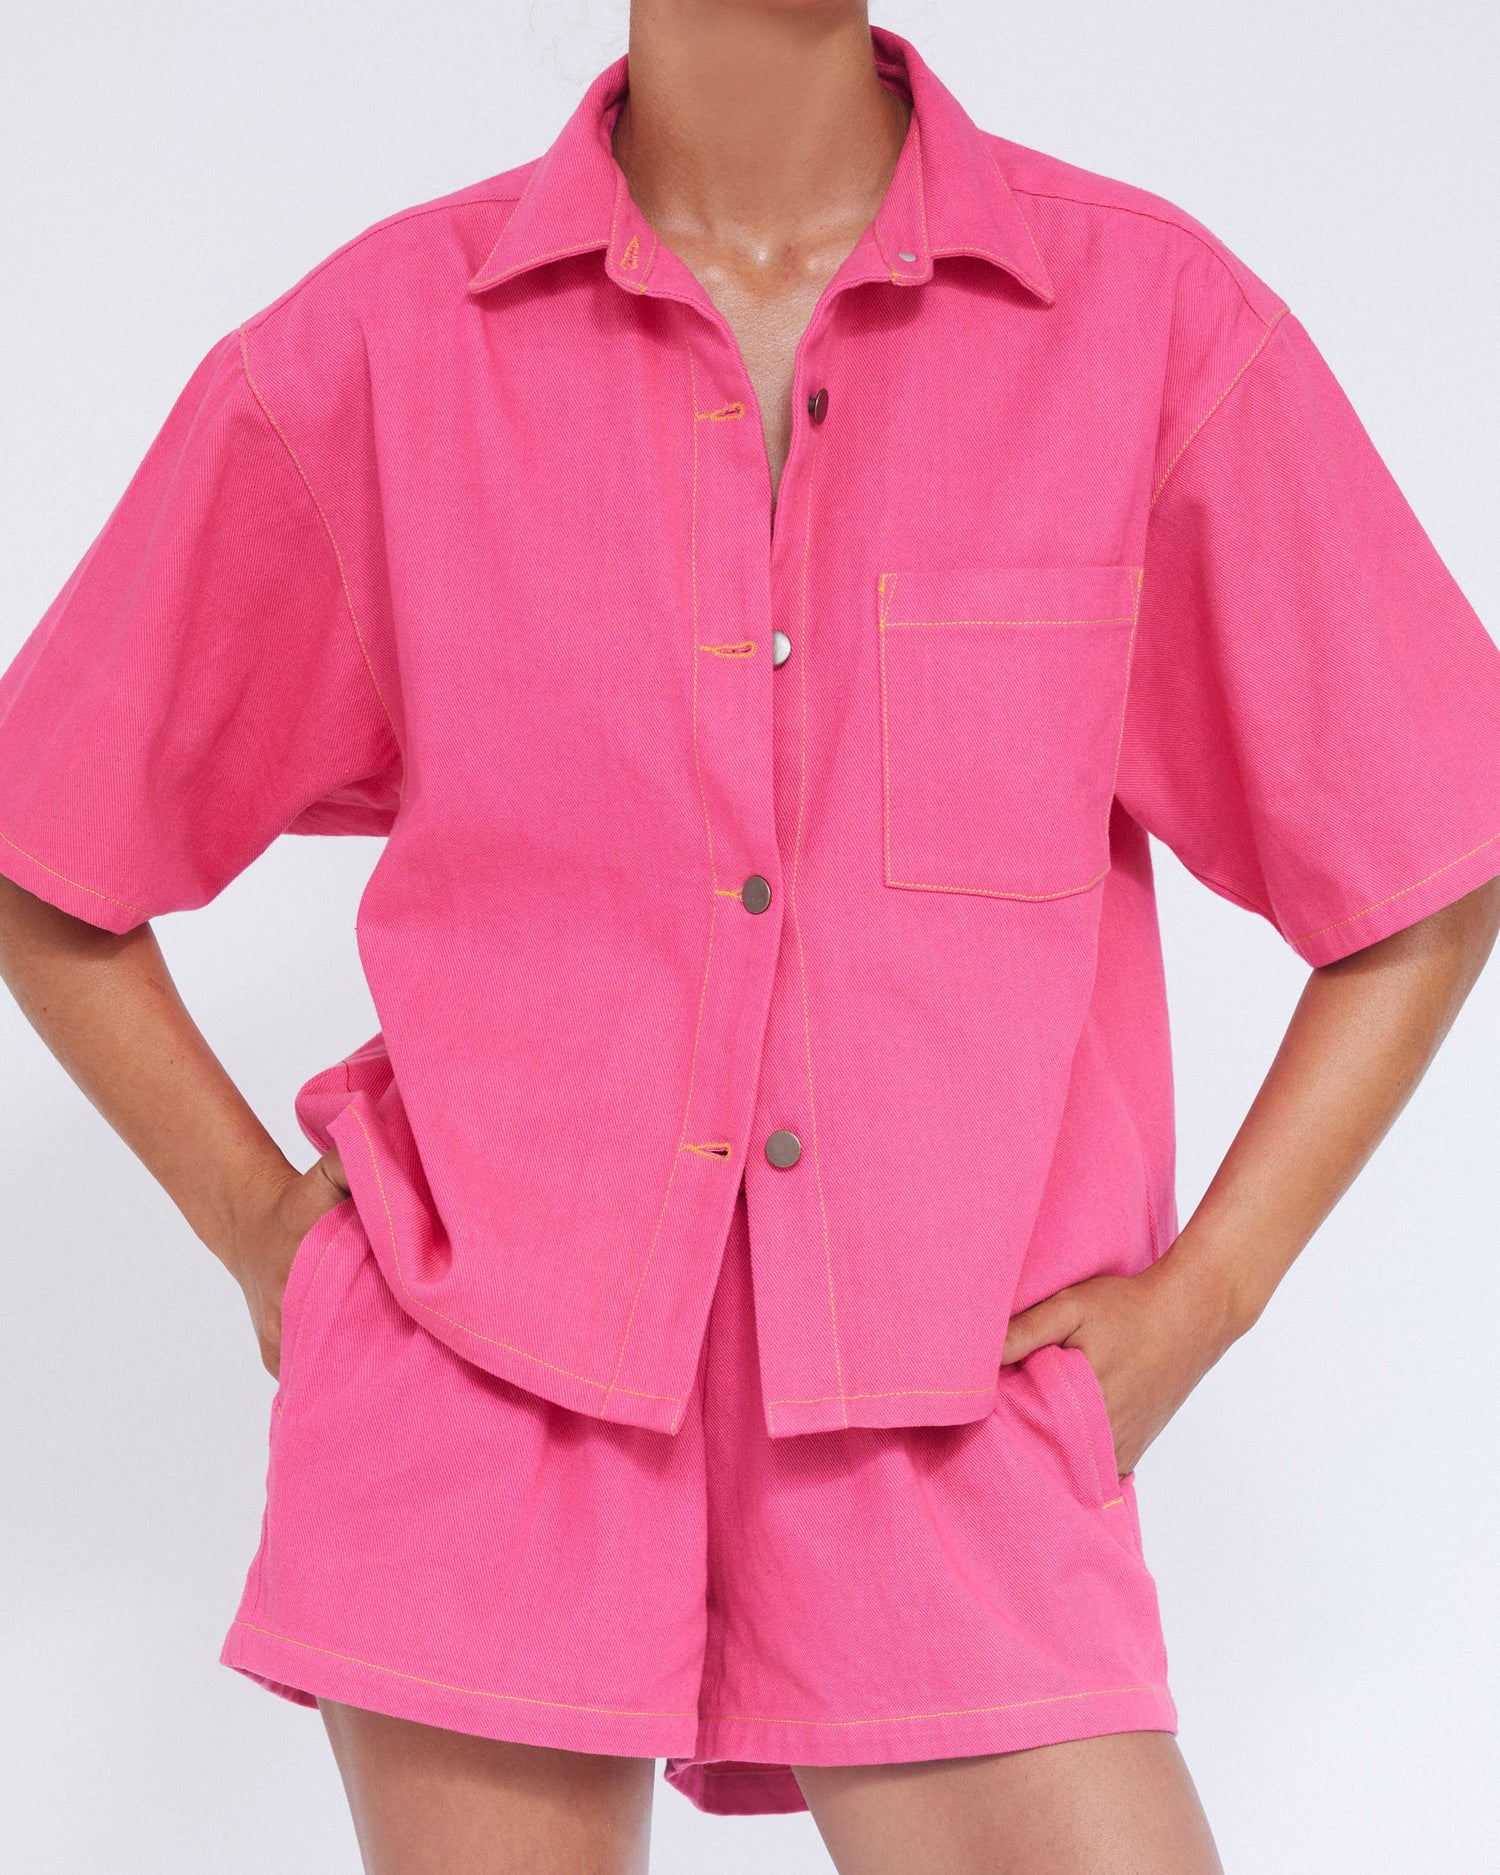 It's Now Cool Beachwear - Camicia a scatola - Roze